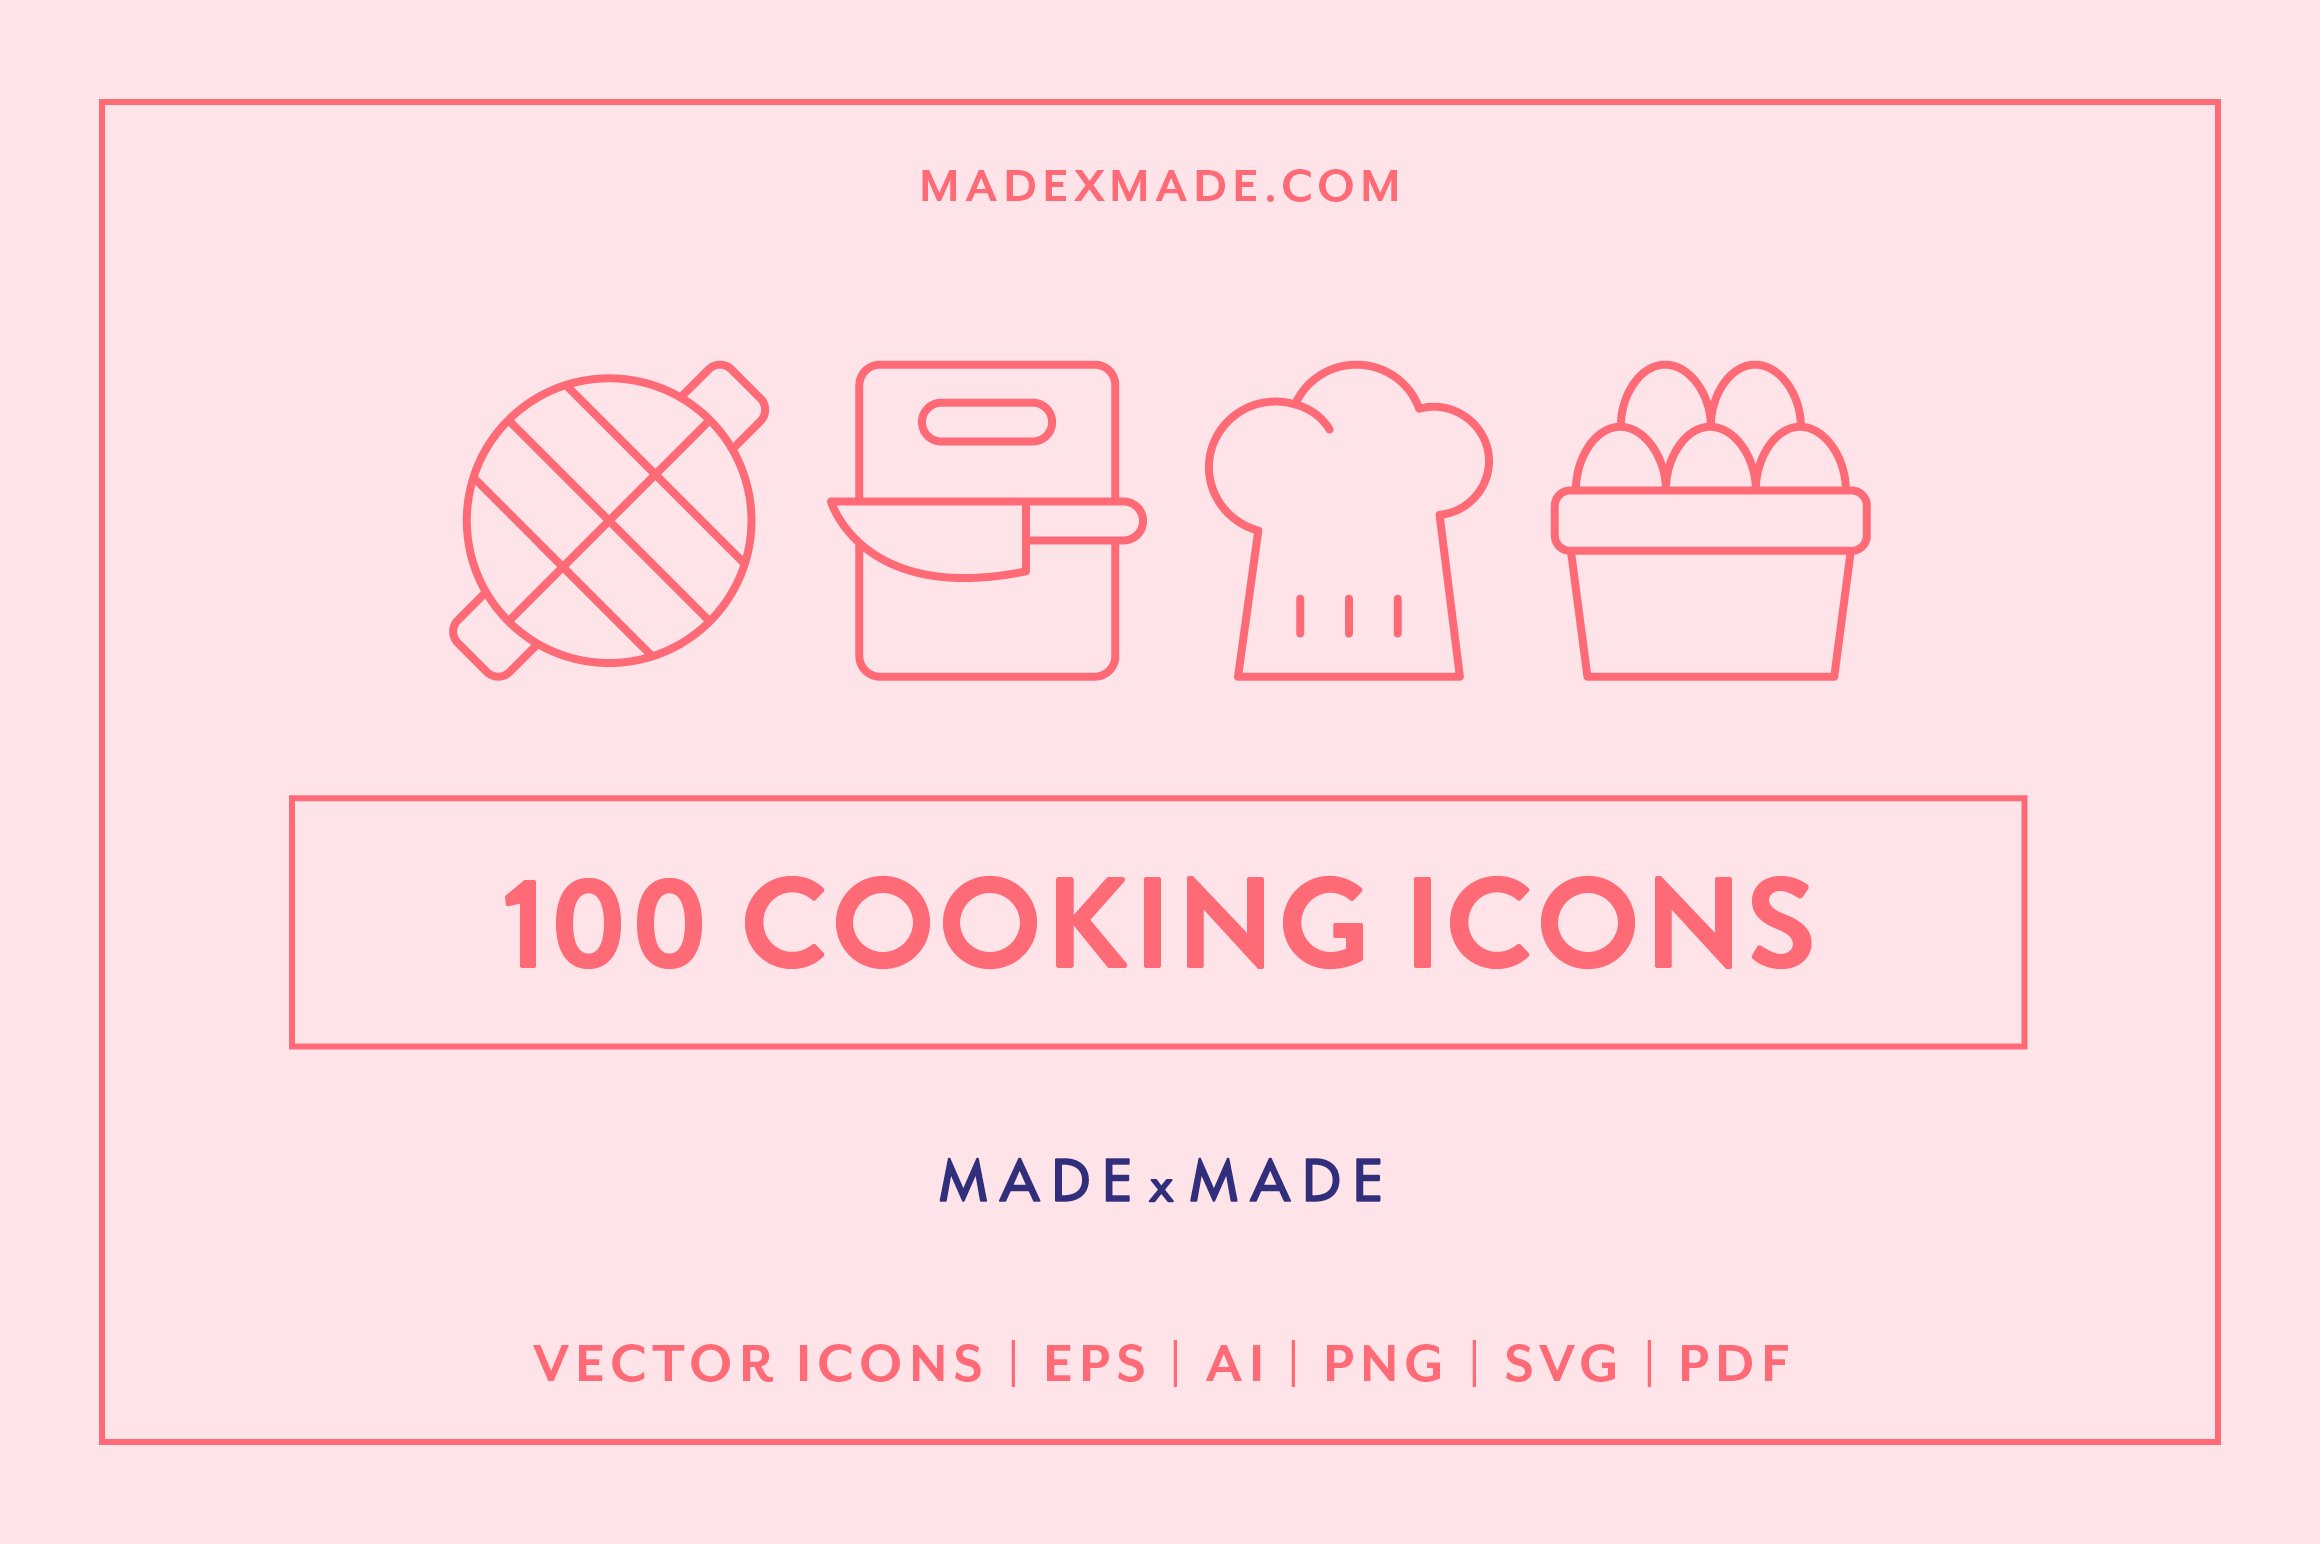 Cooking Line Icons cover image.